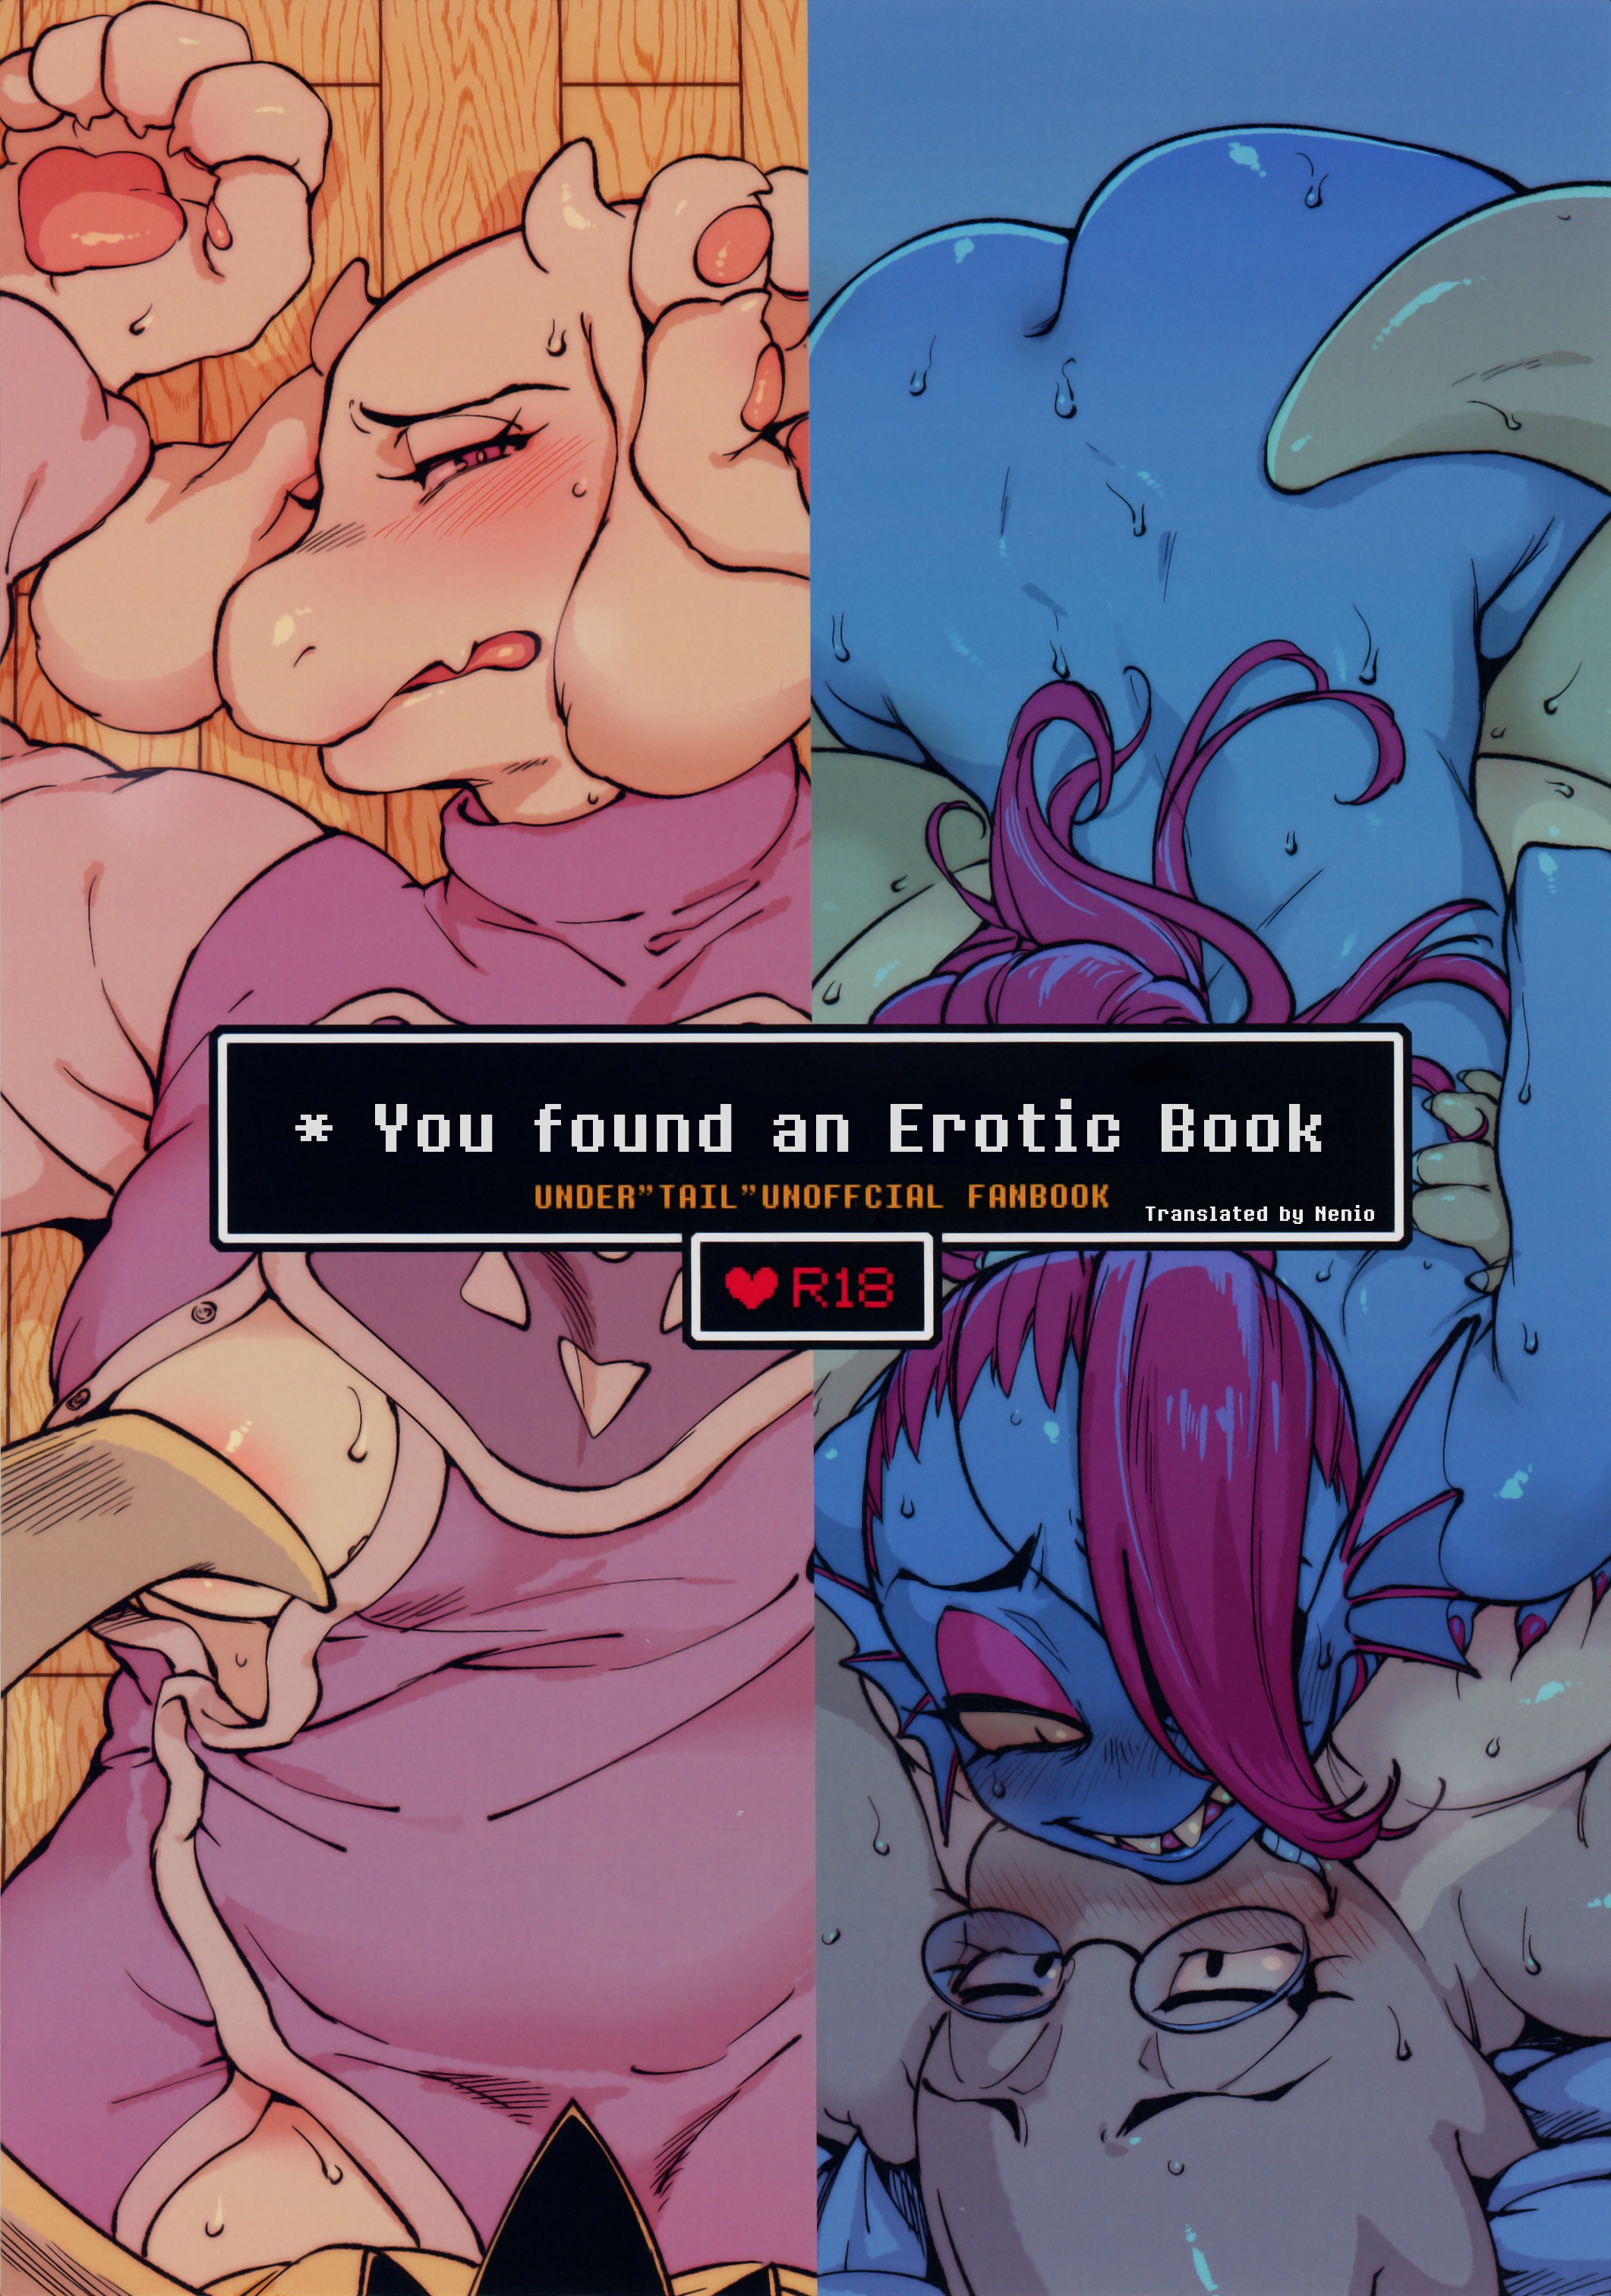 undyne - sorted by number of objects - Free Hentai